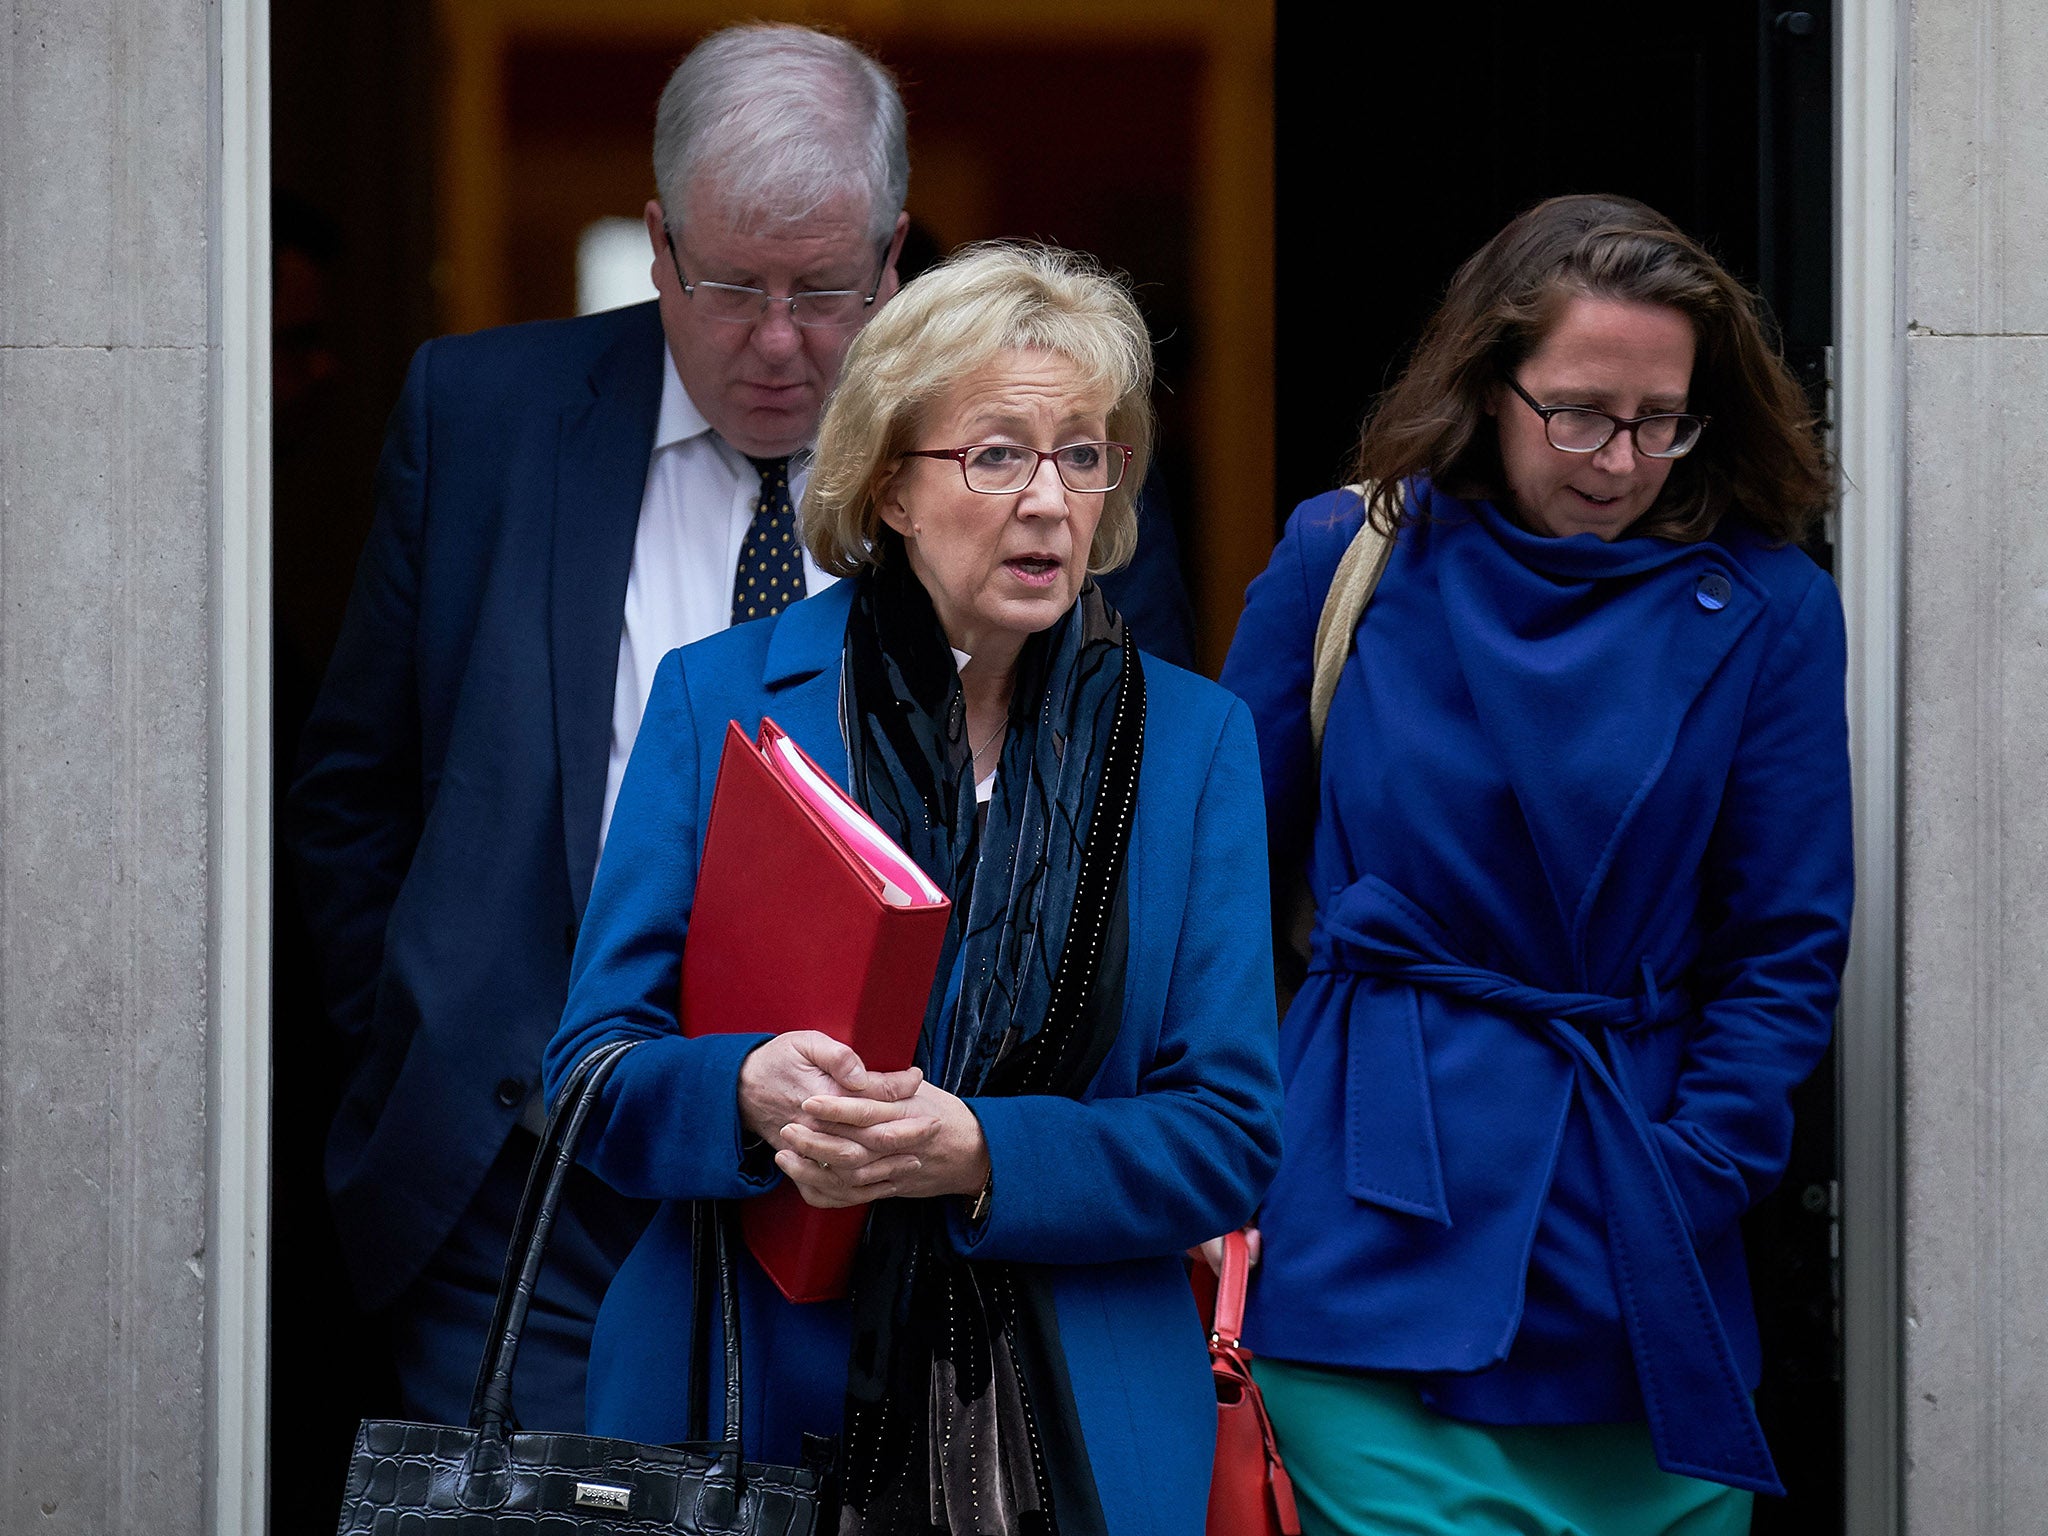 Andrea Leadsom, Leader of the Commons, is the minister responsible for implanting reforms.